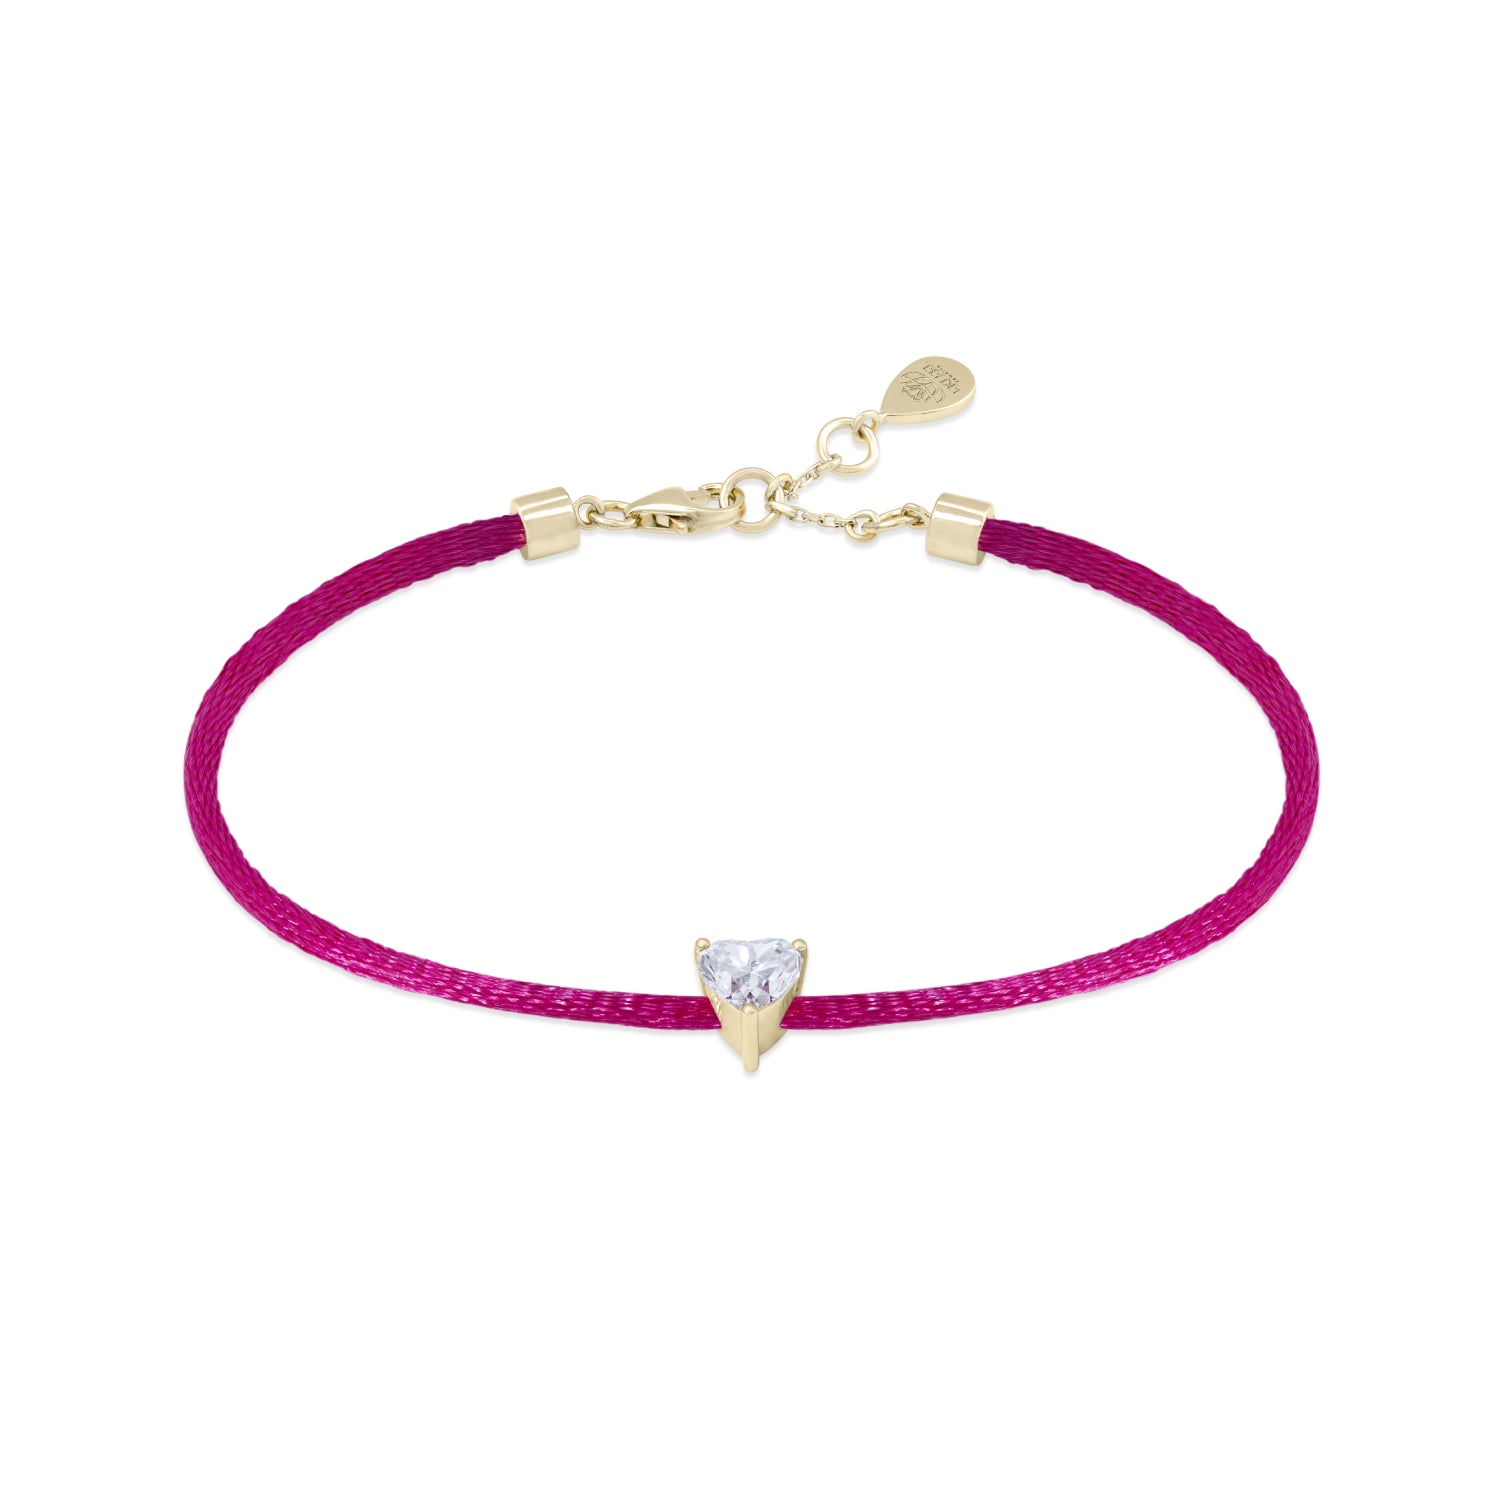 Solitaire Heart-Shaped Diamond Cord Bracelet in Yellow Gold